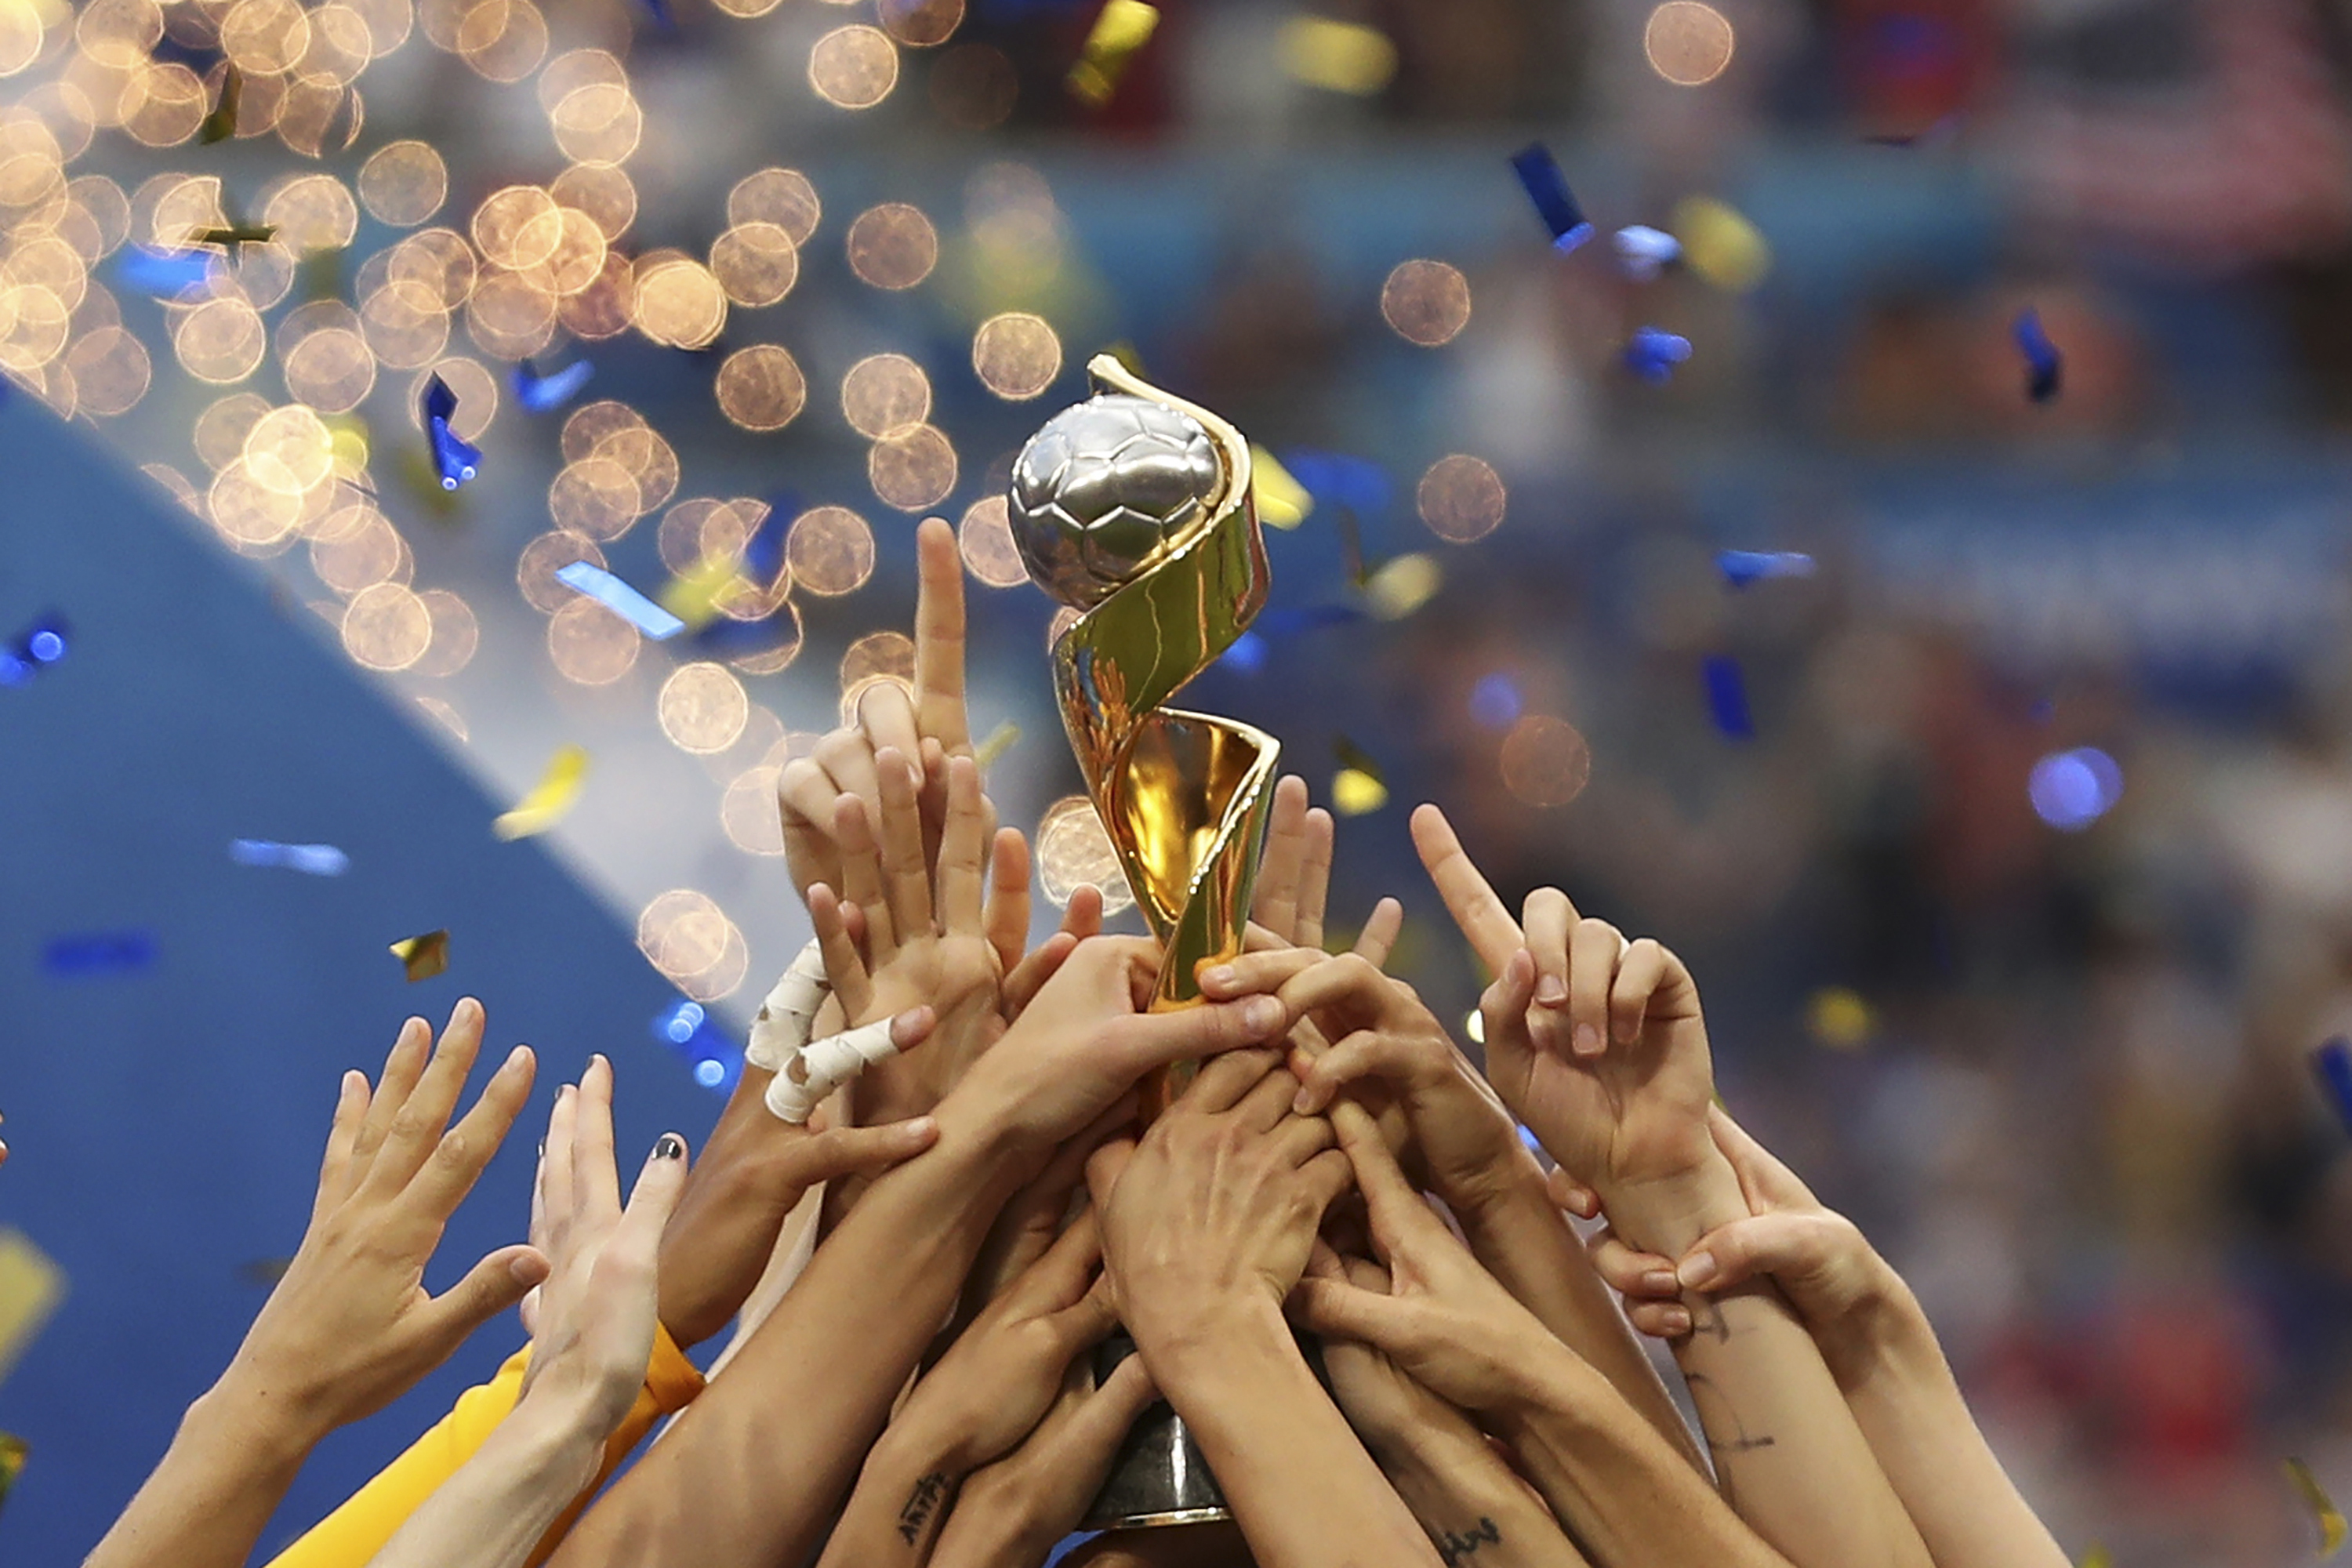 World Cup soccer changes FOX 2 TV schedule Wednesday